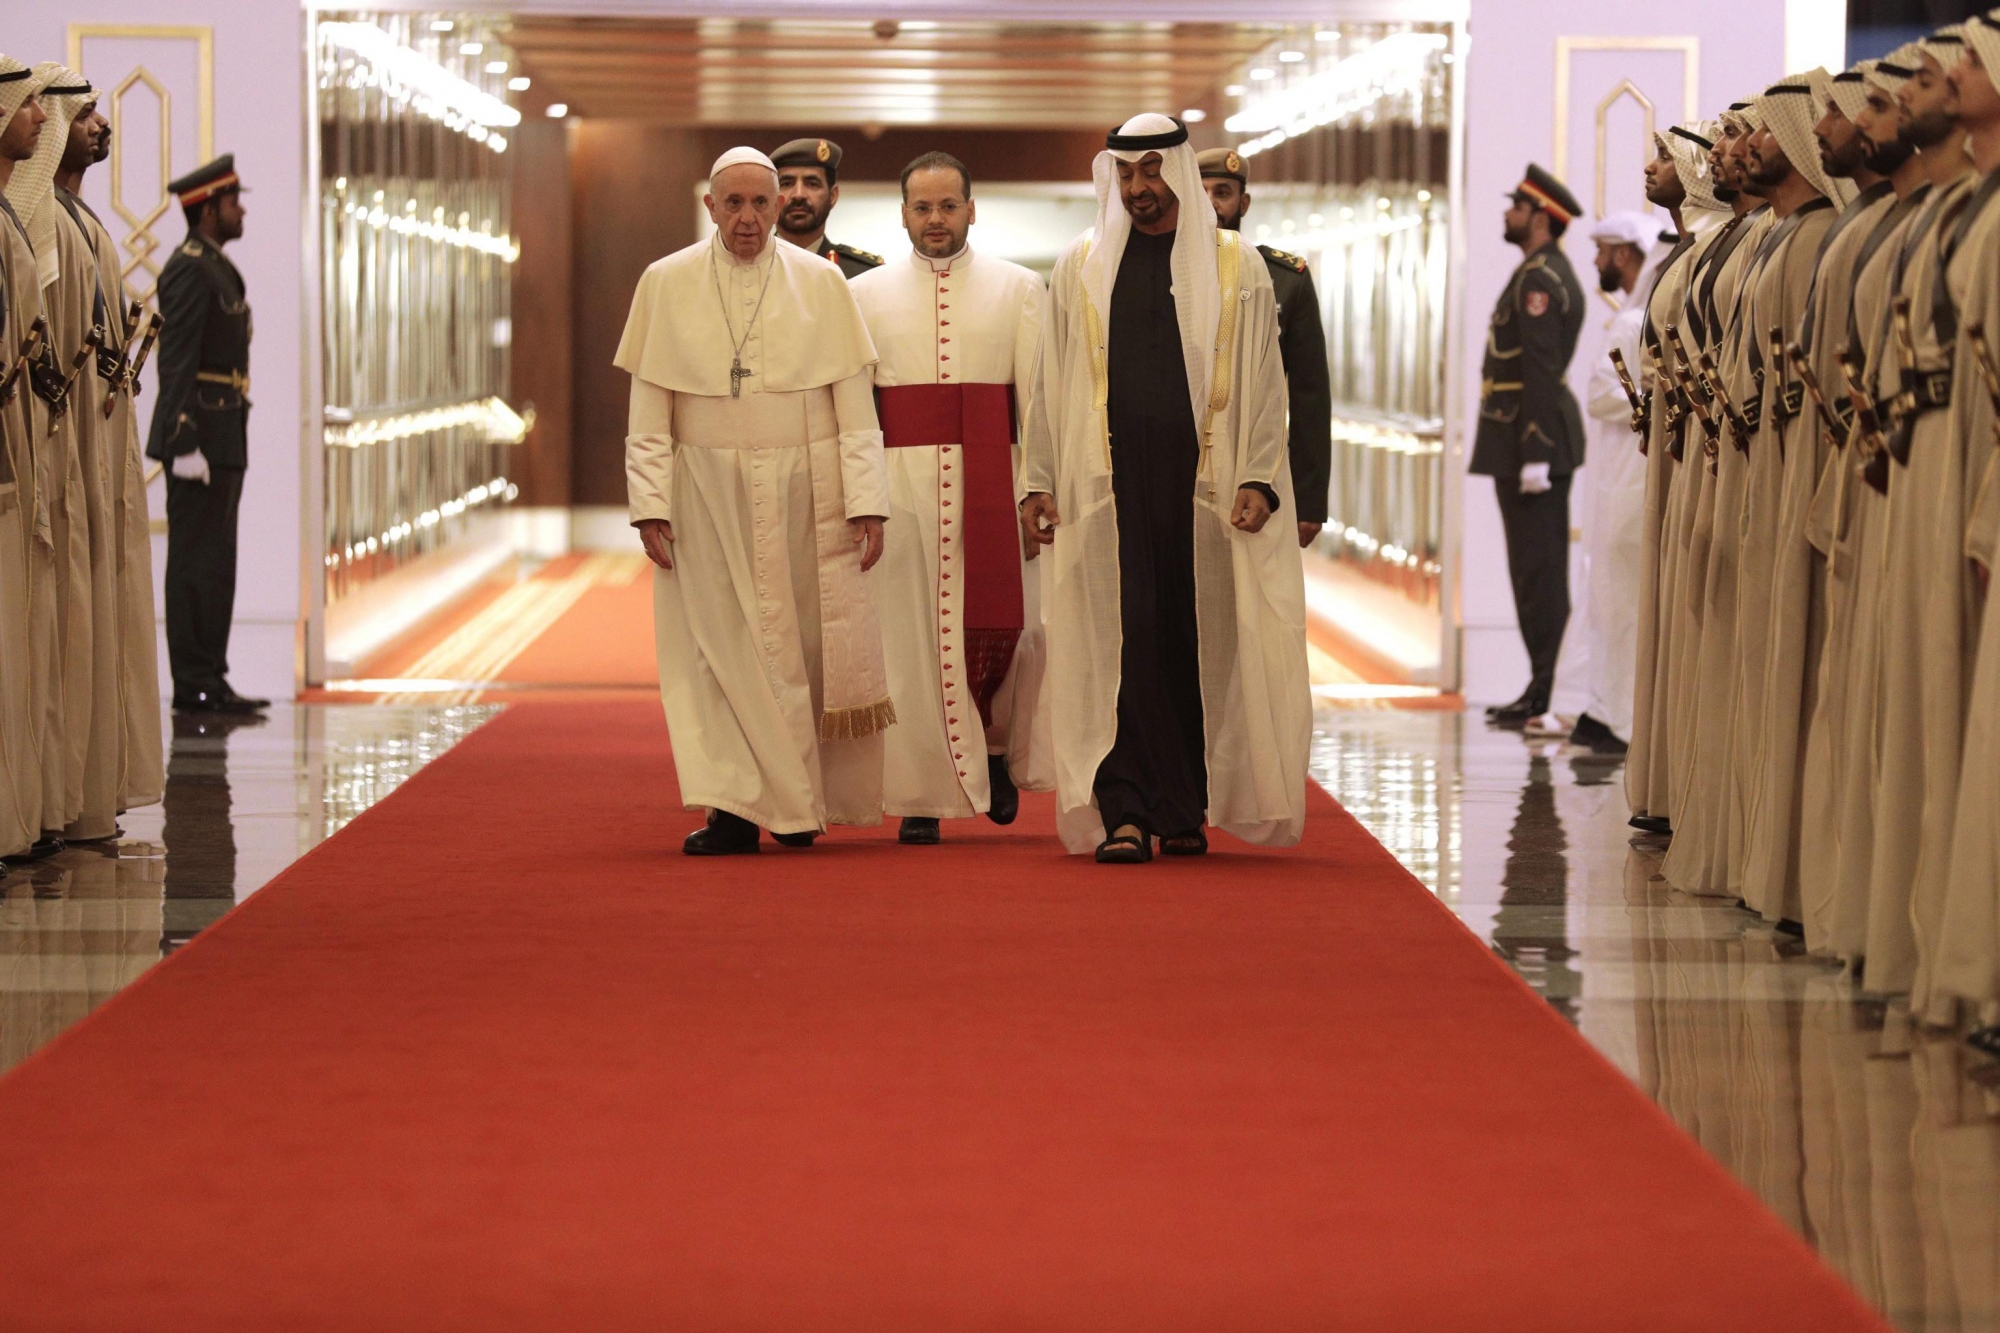 epa07340968 Pope Francis (L) is welcomed by Abu Dhabi's Crown Prince Sheikh Mohammed bin Zayed Al Nahyan, upon his arrival at the Abu Dhabi airport, United Arab Emirates, 03 February 2019.  Pope Francis arrived on three-day visit to the UAE, making him the first pontiff to visit an Arab Gulf state. He will attend an interreligious conference and lead a mass at the Zayed Sports City. The UAE is a Muslim-majority county, however there are some 1.2 million Christian expatriate population.  EPA/ANDREW MEDICHINI / POOL UAE POPE FRANCIS VISIT